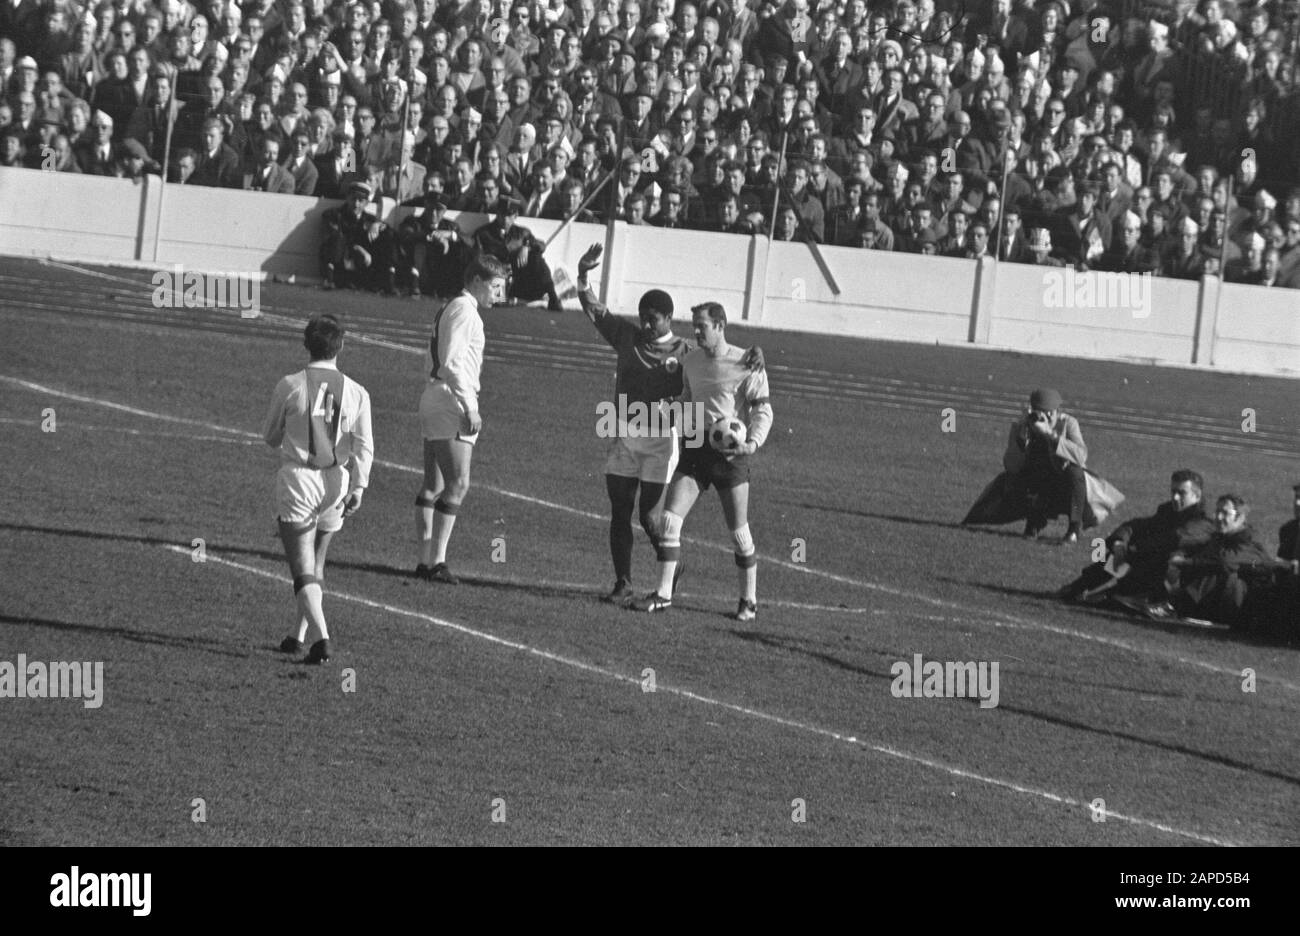 Ajax against Benfica 3-0, decision match quarterfinals European Cup I in Paris game moments (from high point of view) Date: March 5, 1969 Location: France, Paris Keywords: sport, football Institution name: Benfica Stock Photo